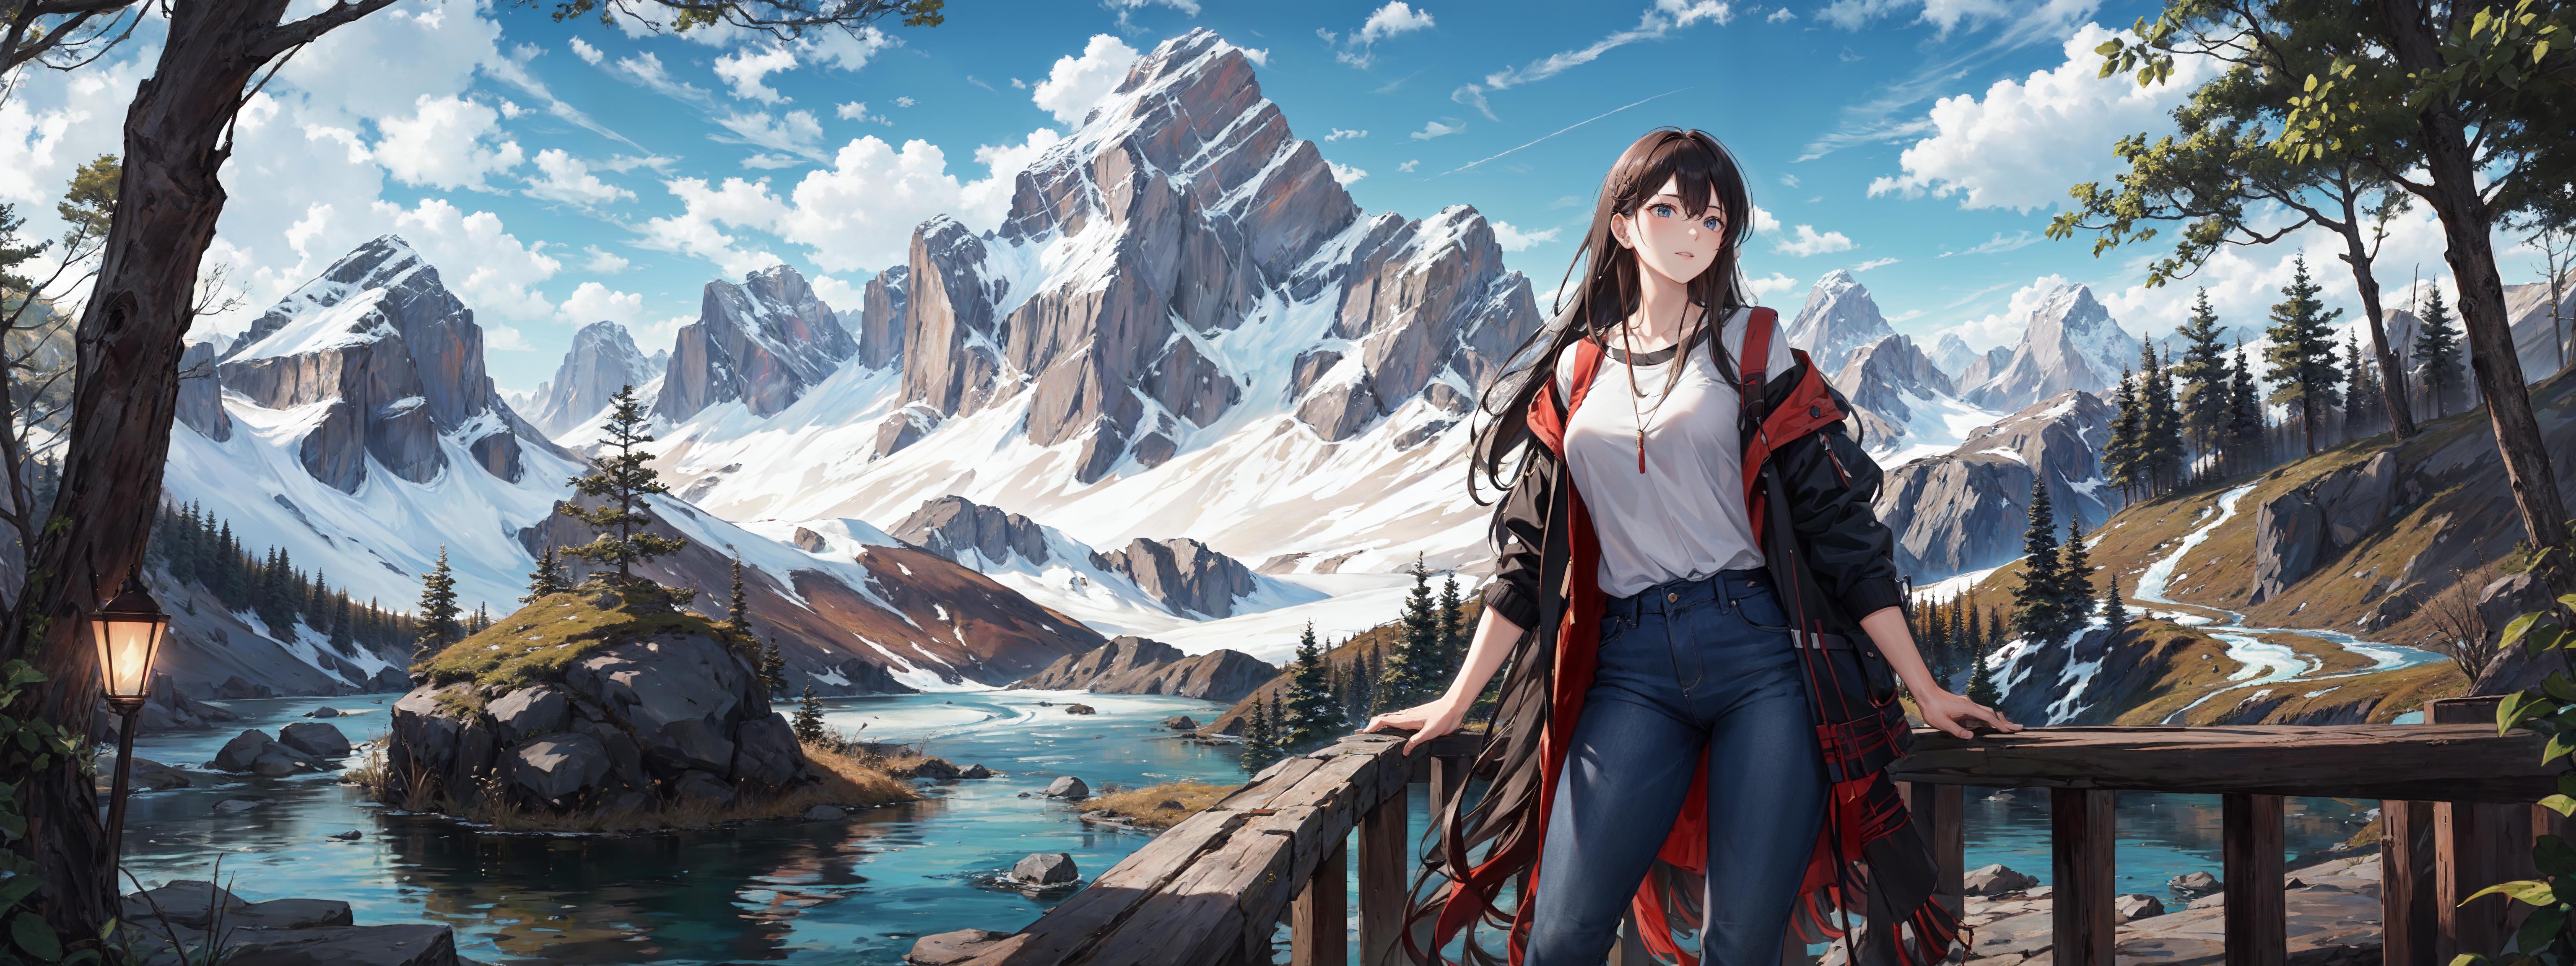 A woman with long hair looking at a body of water with mountains in the background.